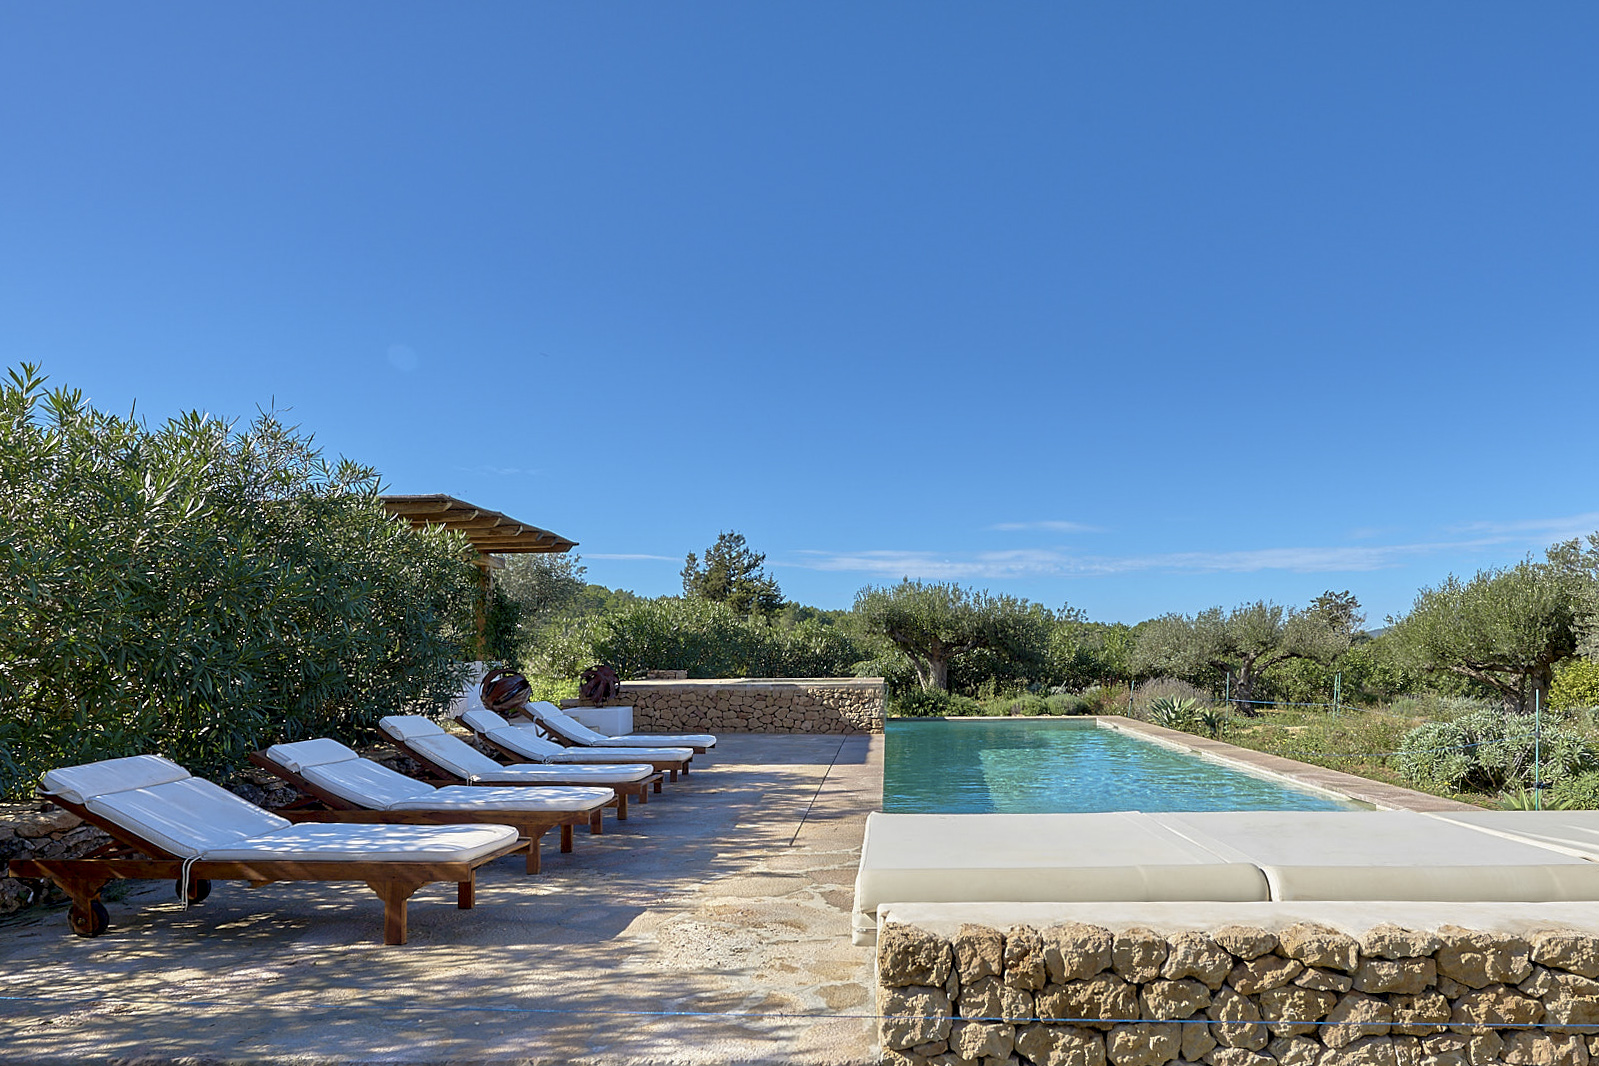 Pool and chillout area of a luxury villa for sale in Ibiza